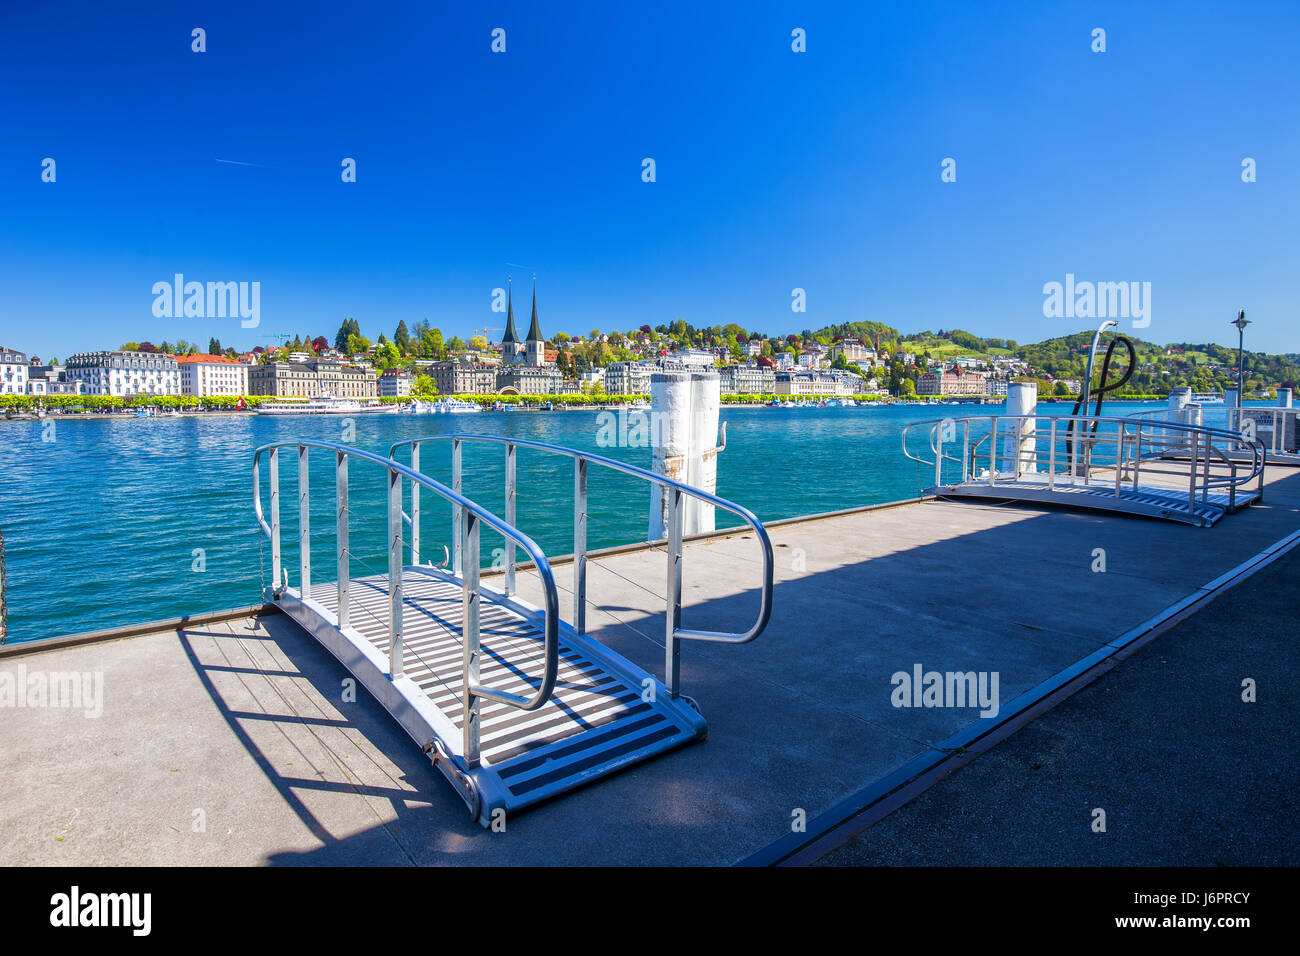 Harbor in Lucerne city with the view of Lucerne lake and promenade. Stock Photo